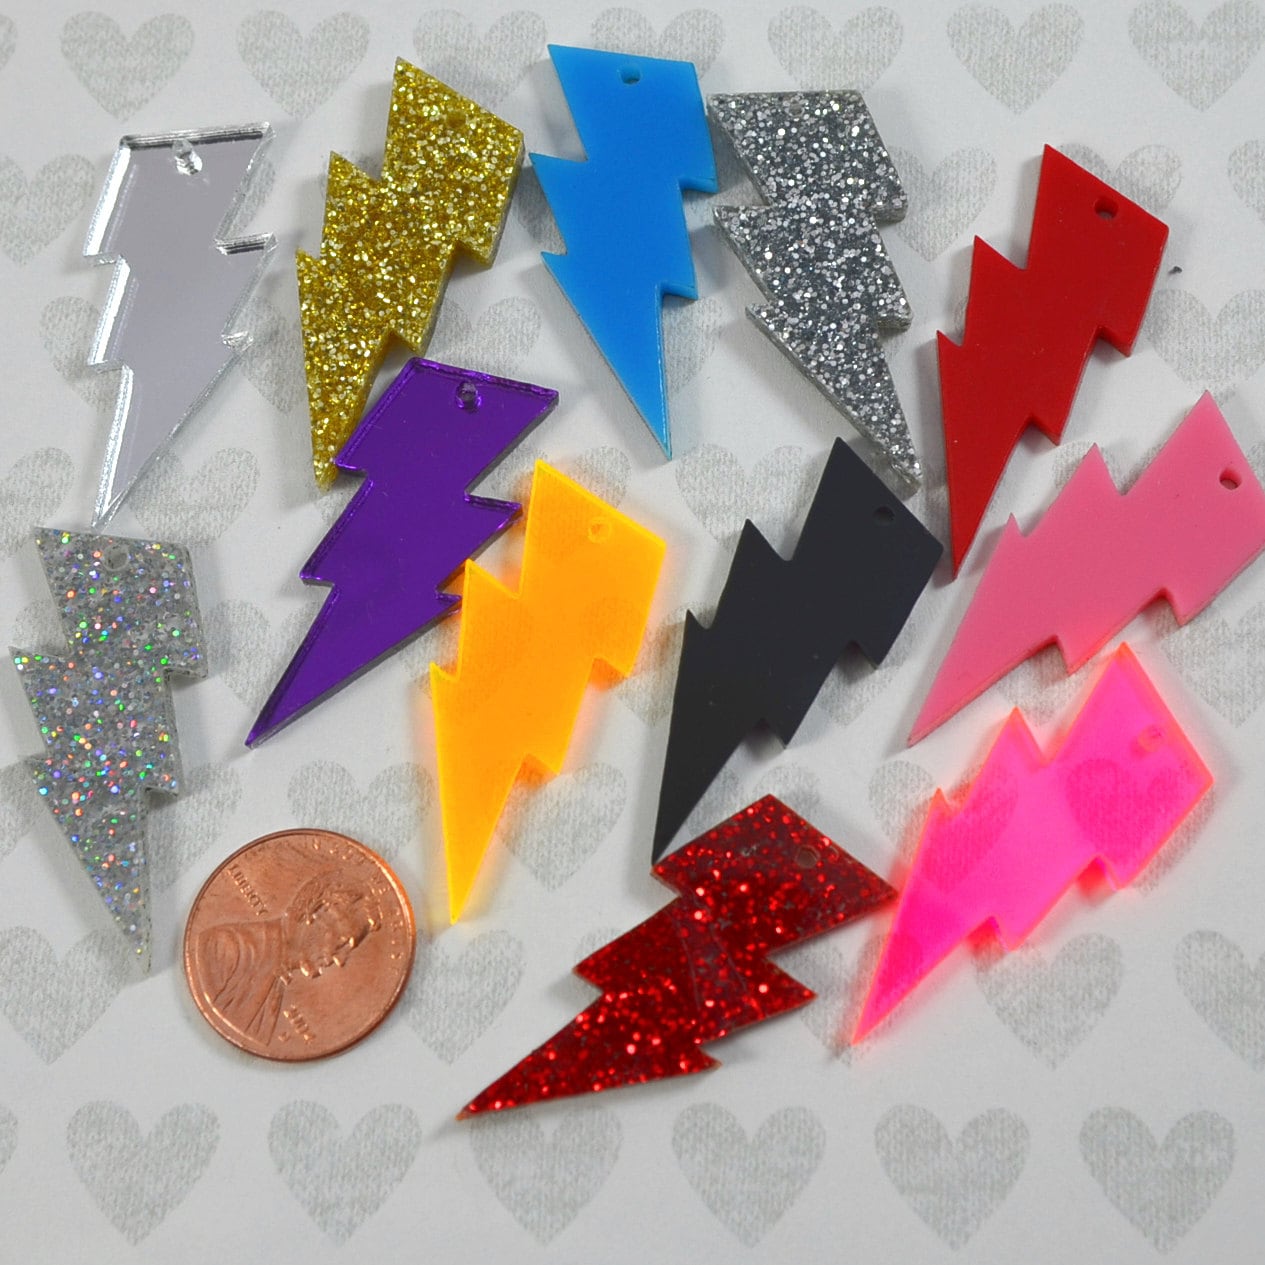 LIGHTNING BOLT LOT Set of 12 Charms or Cabs in Laser Cut Acrylic